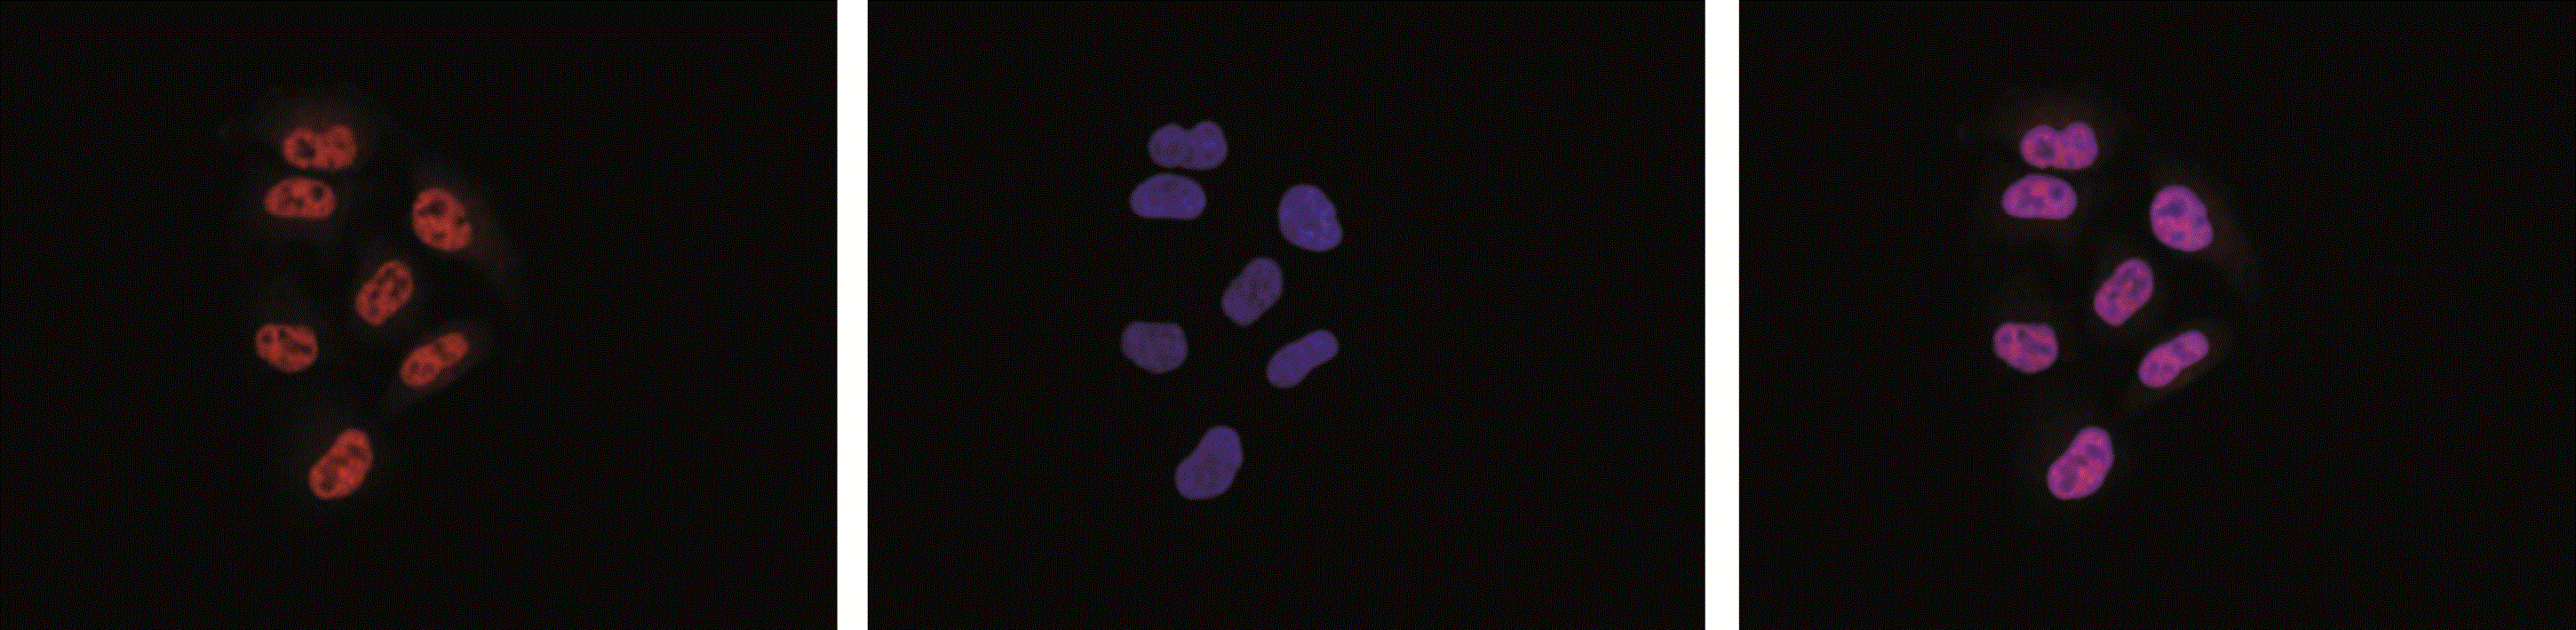 HeLa cells were stained with the Pol II Monoclonal Antibody (bsm-53004M) and DAPI. Cells were fixed with methanol and blocked with PBS\/TX-100 containing 5% normal goat serum and 1% BSA. The cells were labelled with antibody (left) at 1:500 dilution in blocking solution followed by an anti-mouse antibody conjugated to Alexa594. The middle panel shows staining of the nuclei with DAPI. A merge of the two staining is shown on the right.